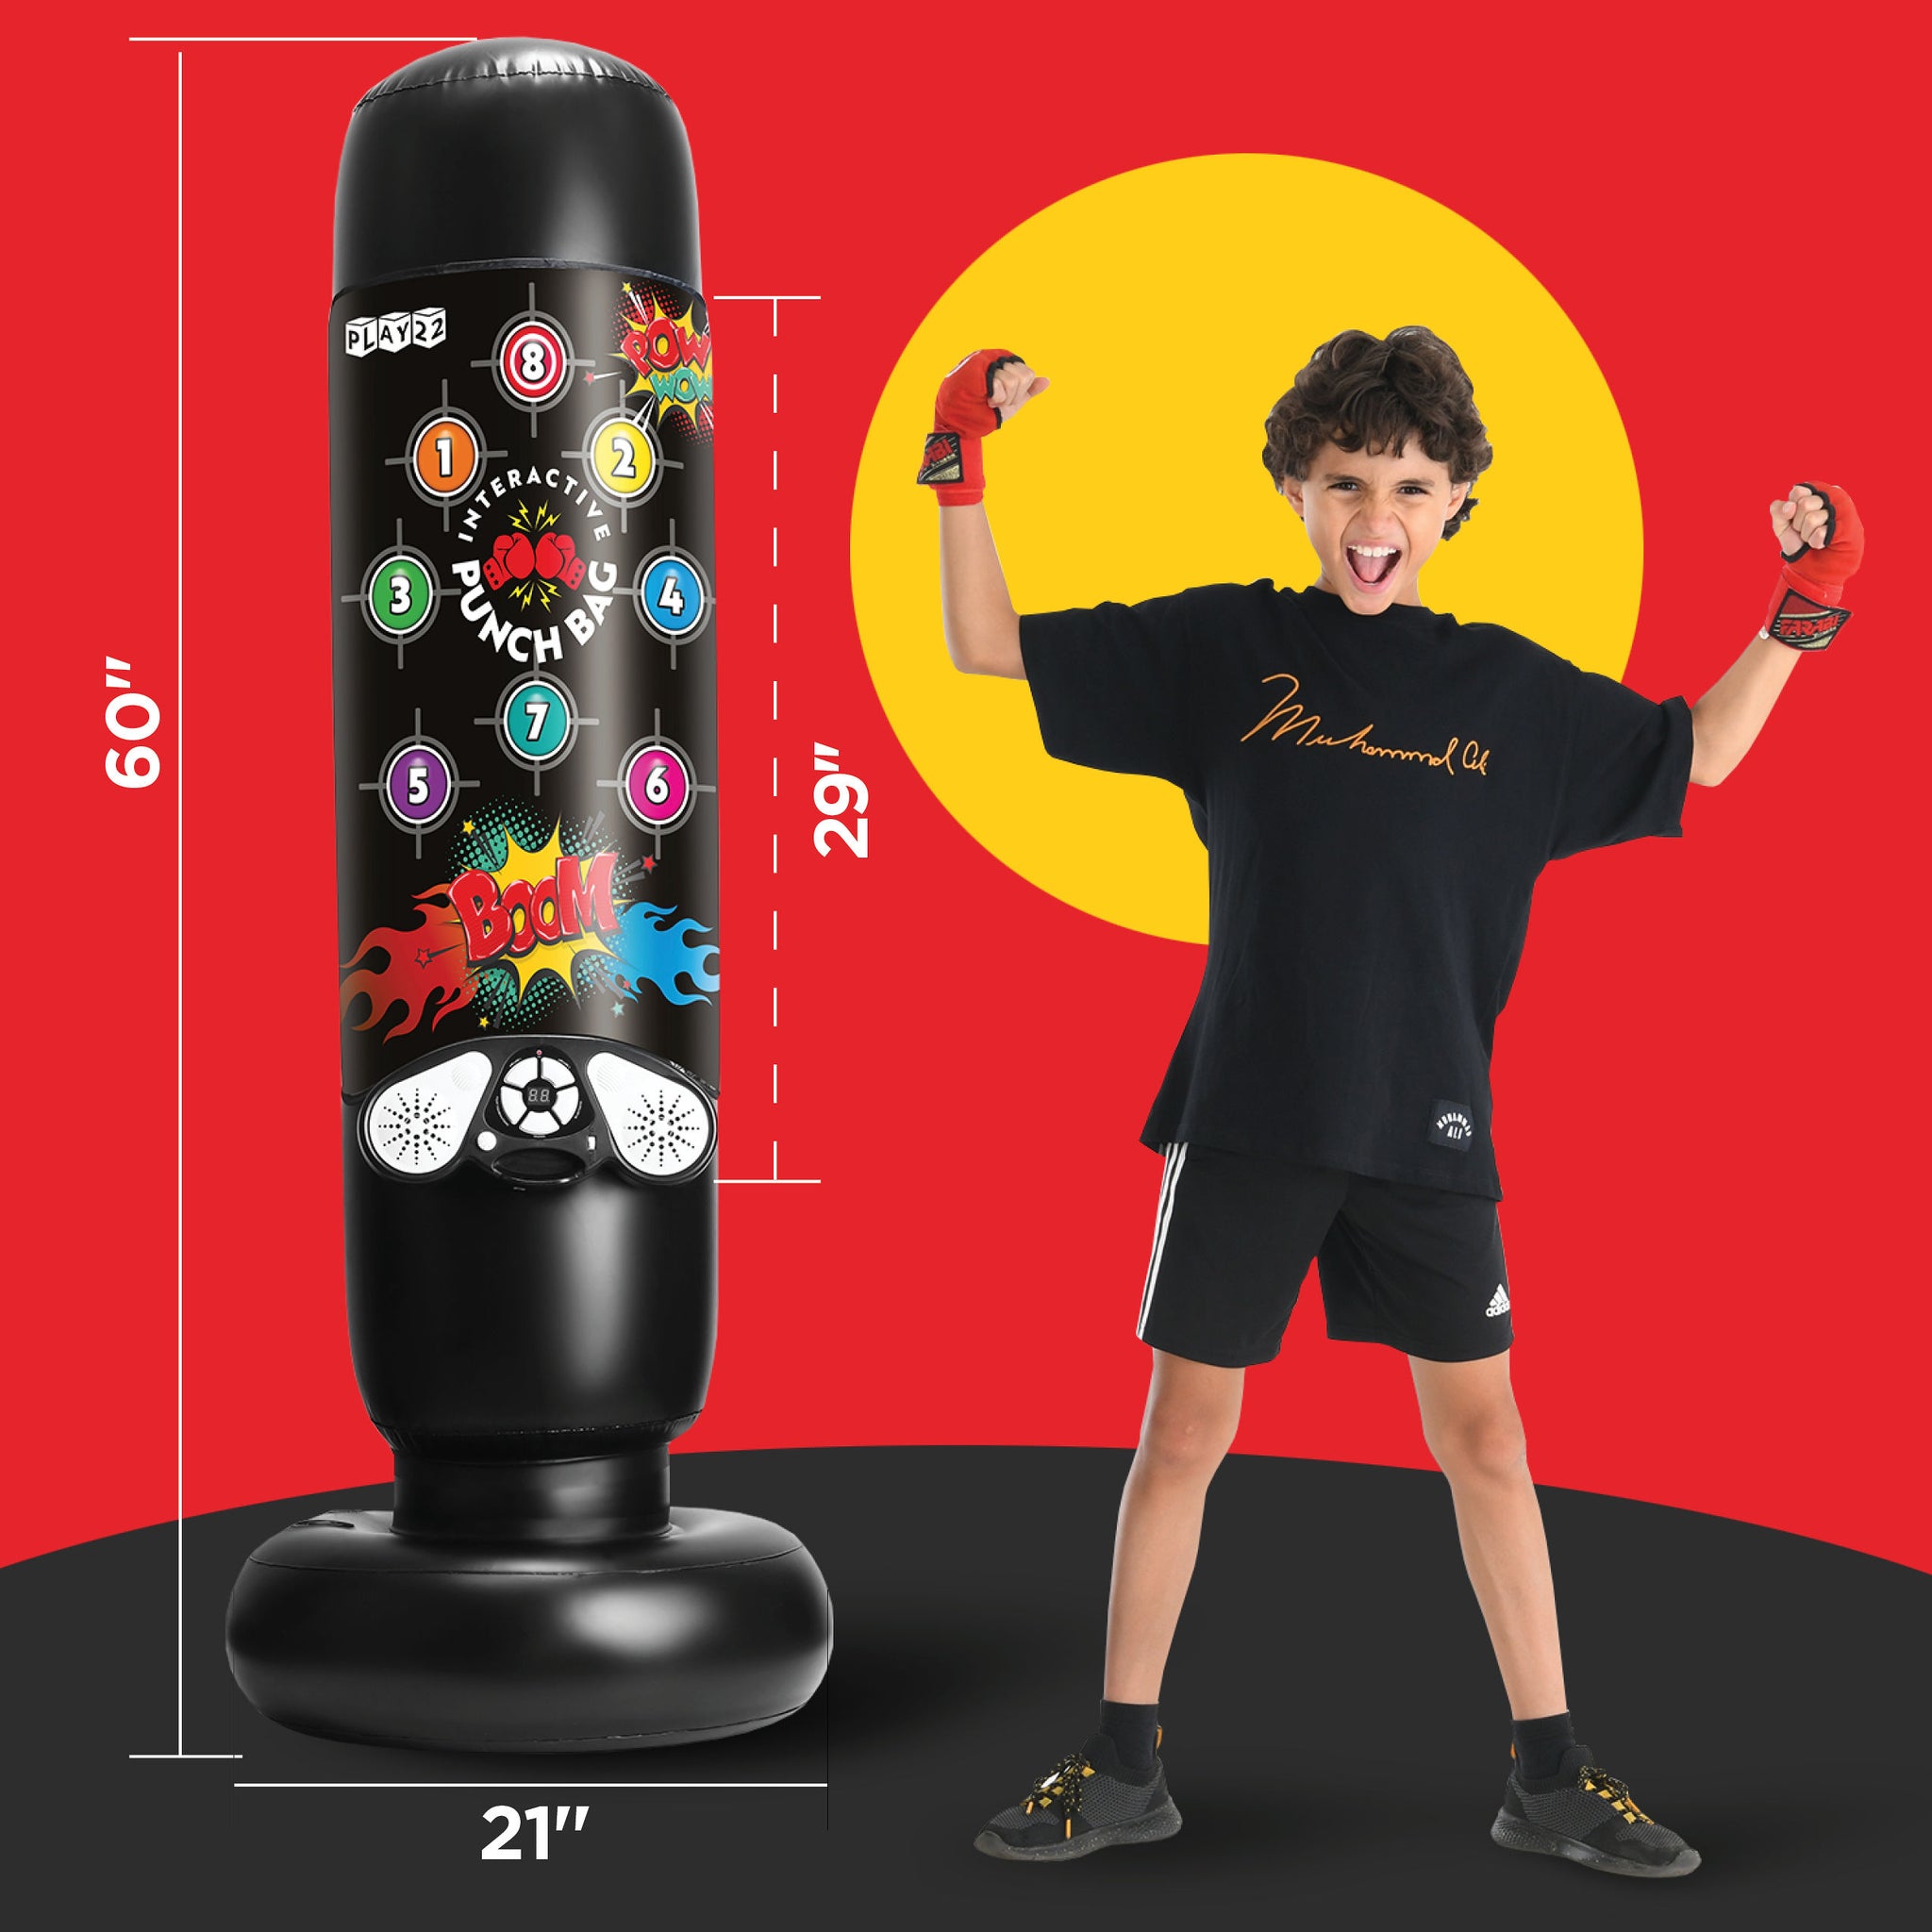 Play22 Boxing Bag Interactive Punching Bag for Kids - with